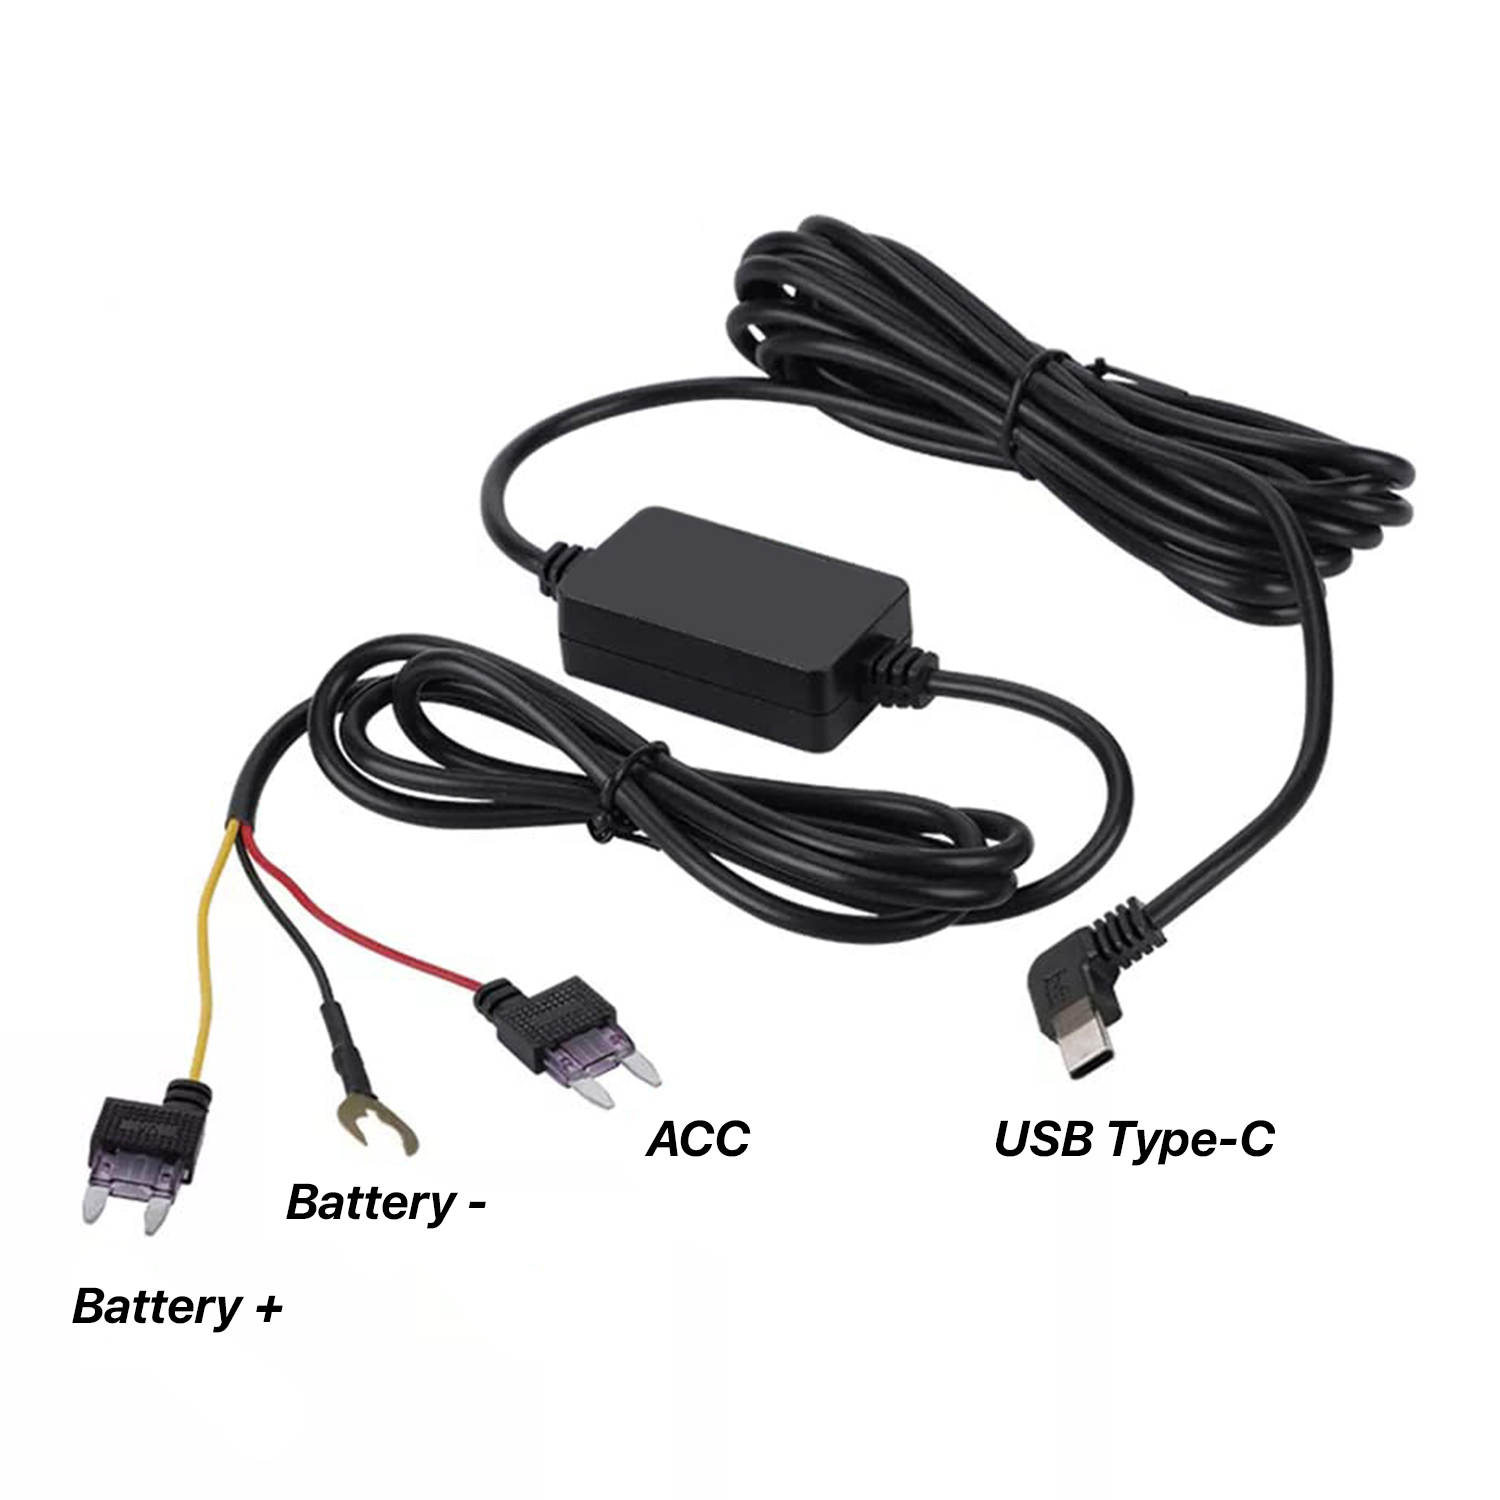 IZI Drive Dash Cam USB Hardwire Cable Kit for 24 Hour Parking Monitoring, Wiring Asseccories & 12 Feet Lenght , 12V-24V to 5V/2.5A, Low Voltage Protection, Fuse Adapter Easy Installation